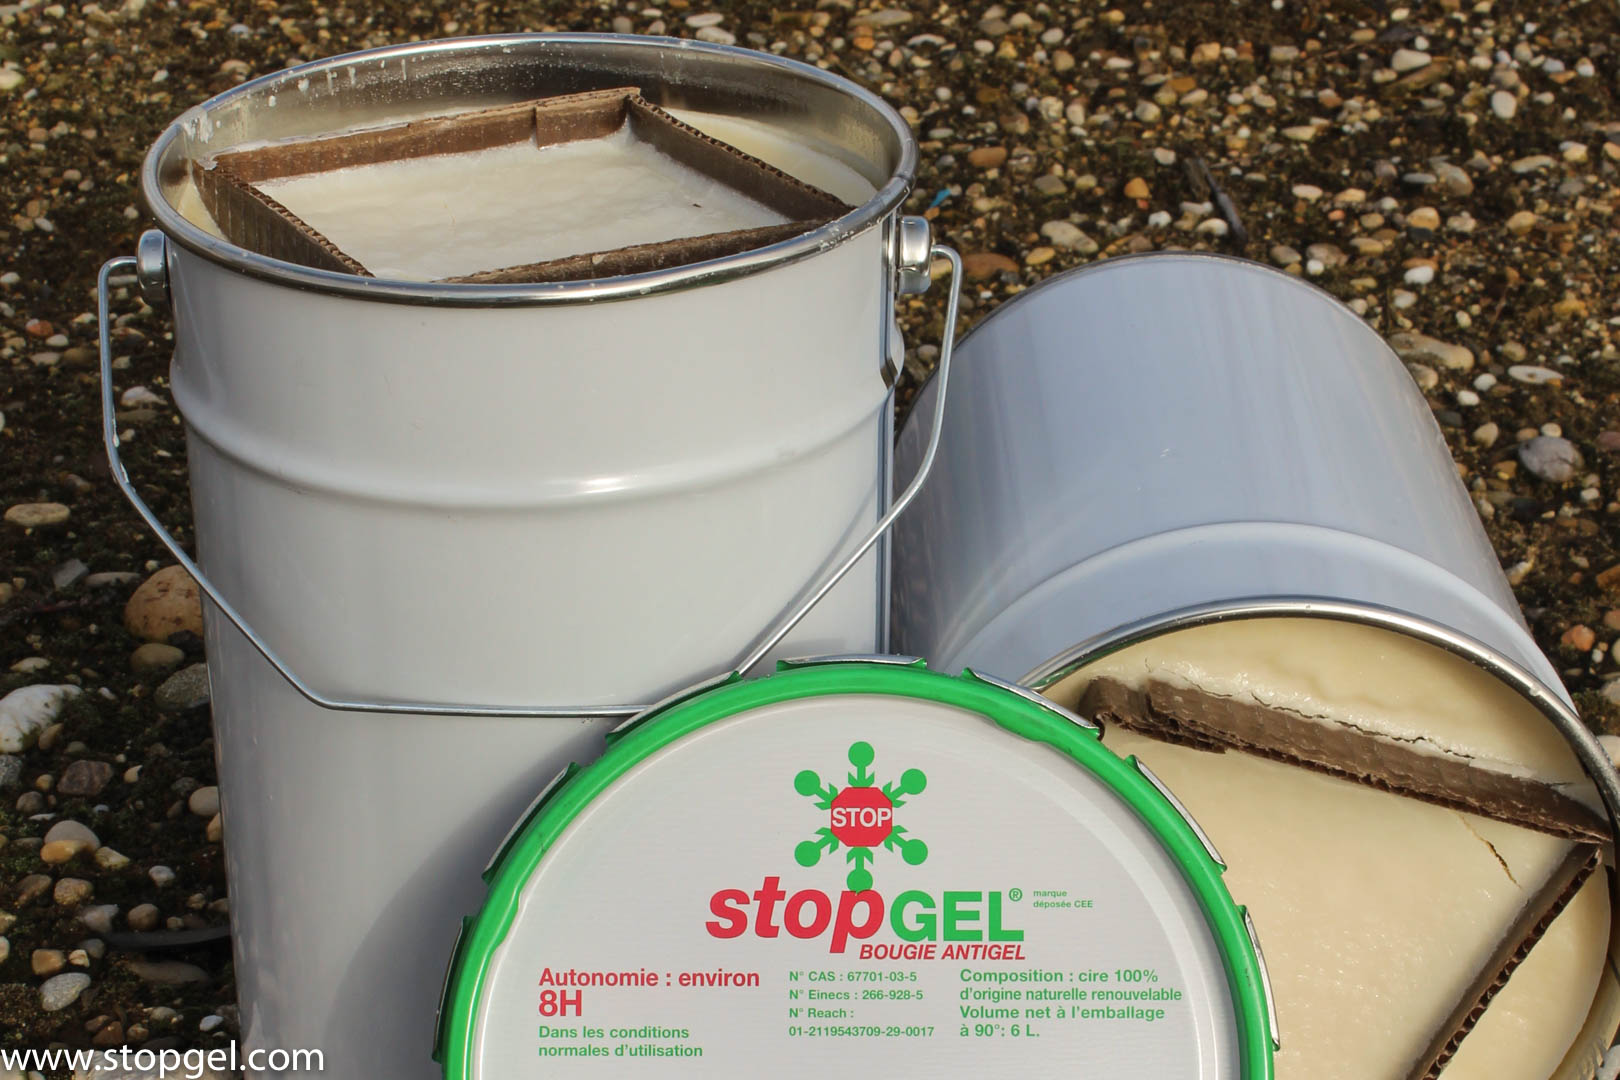 STOPGEL GREEN candles are 100% natural and renewable